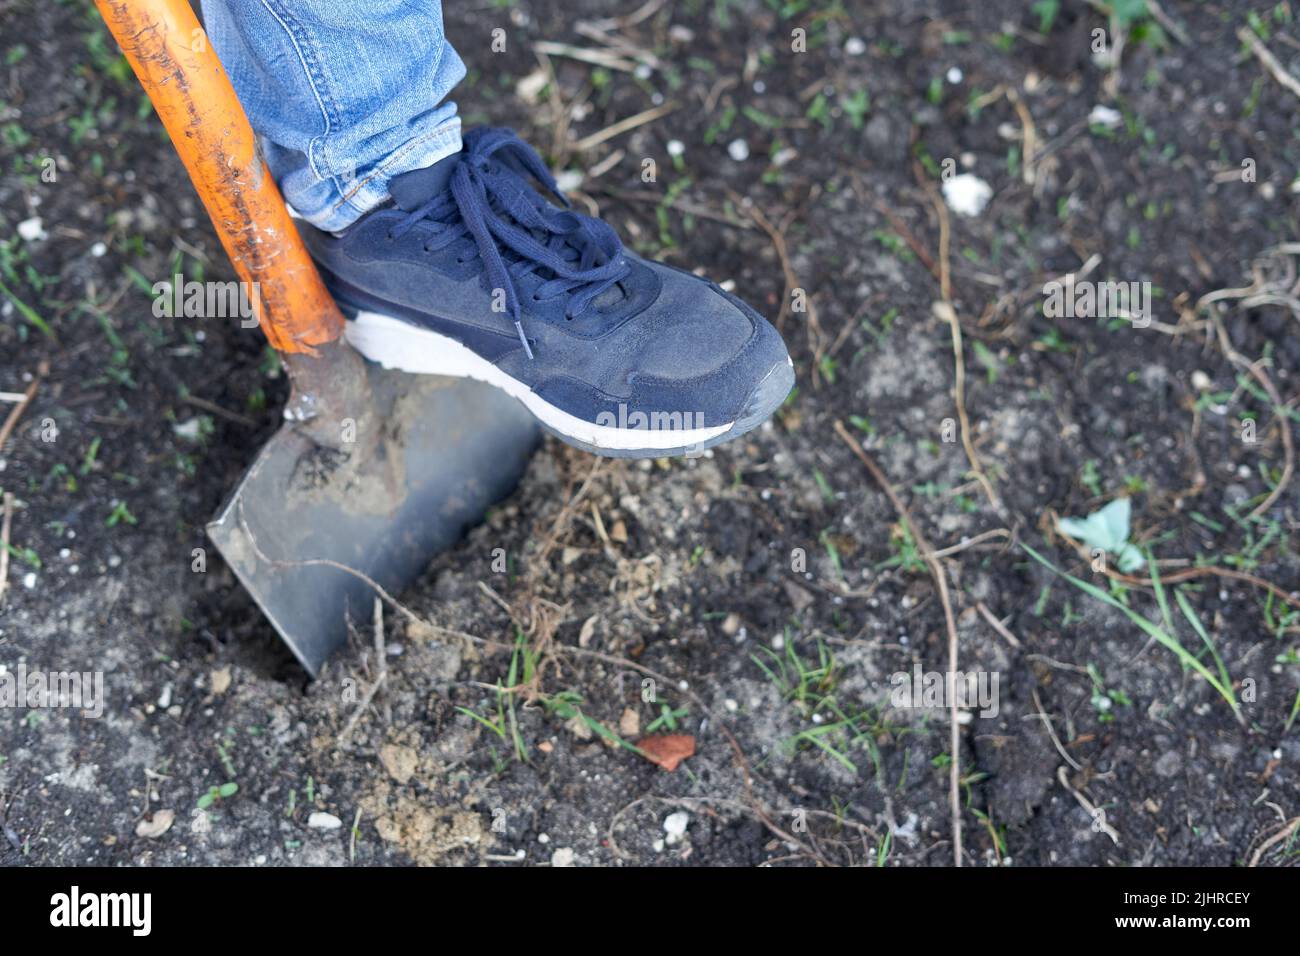 Top view of a person ploughing the land Stock Photo